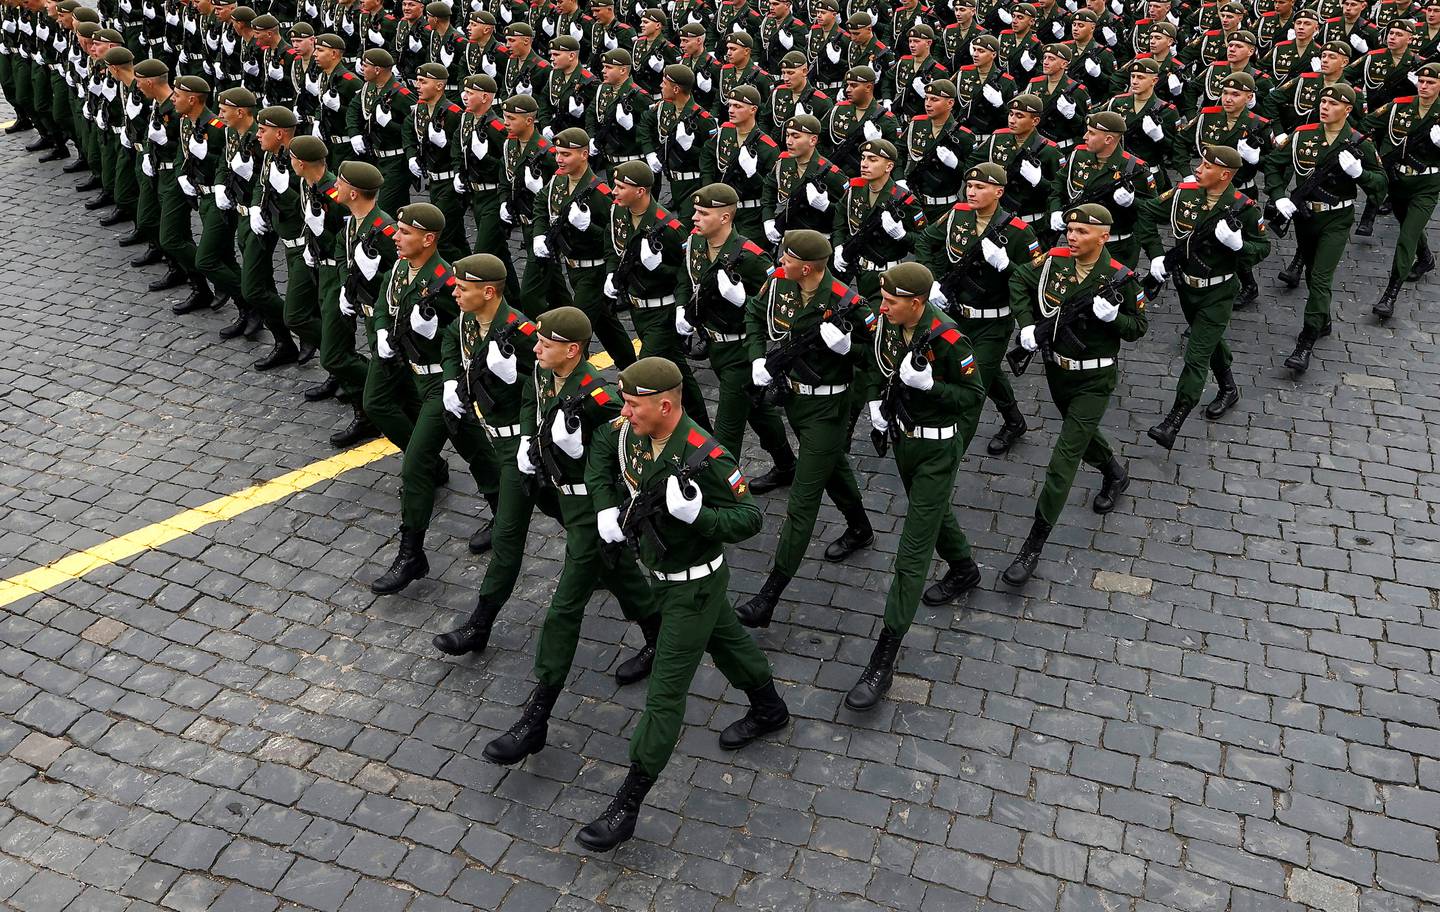 Russian service members march during a military parade on Victory Day, in Moscow's Red Square. Reuters